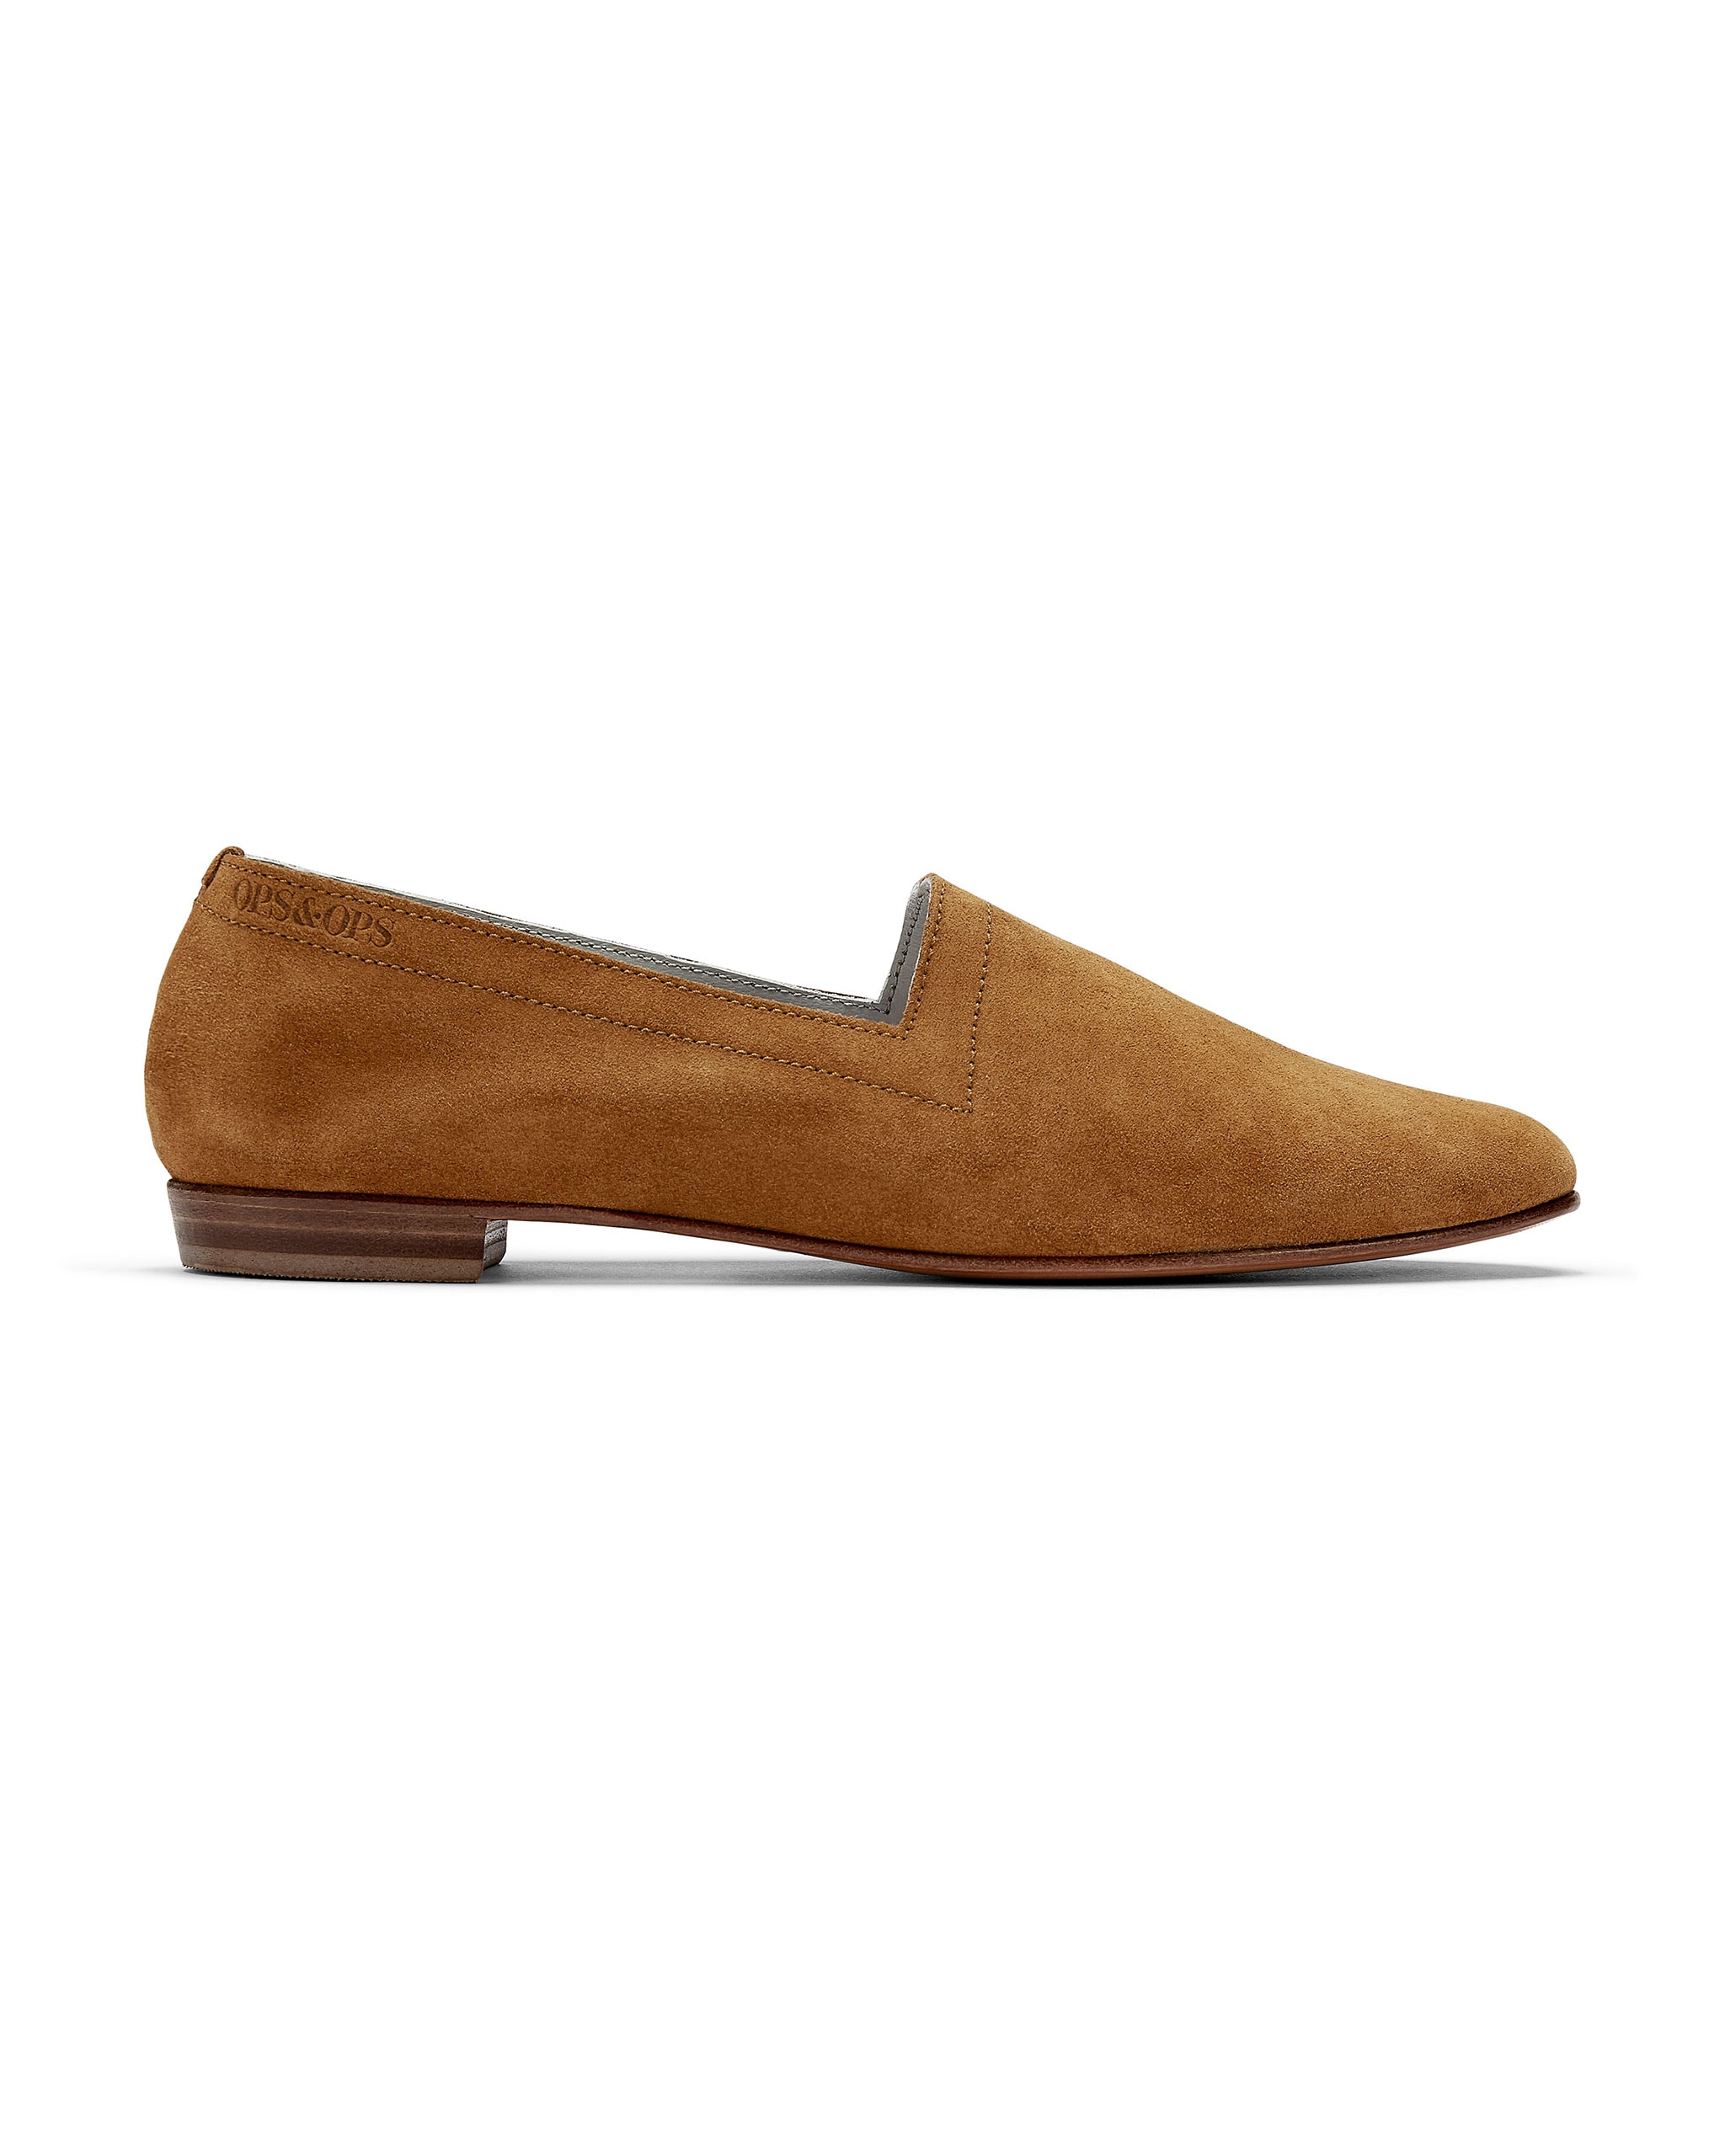 Ops&Ops No10 Toffee calfskin suede flats, side view